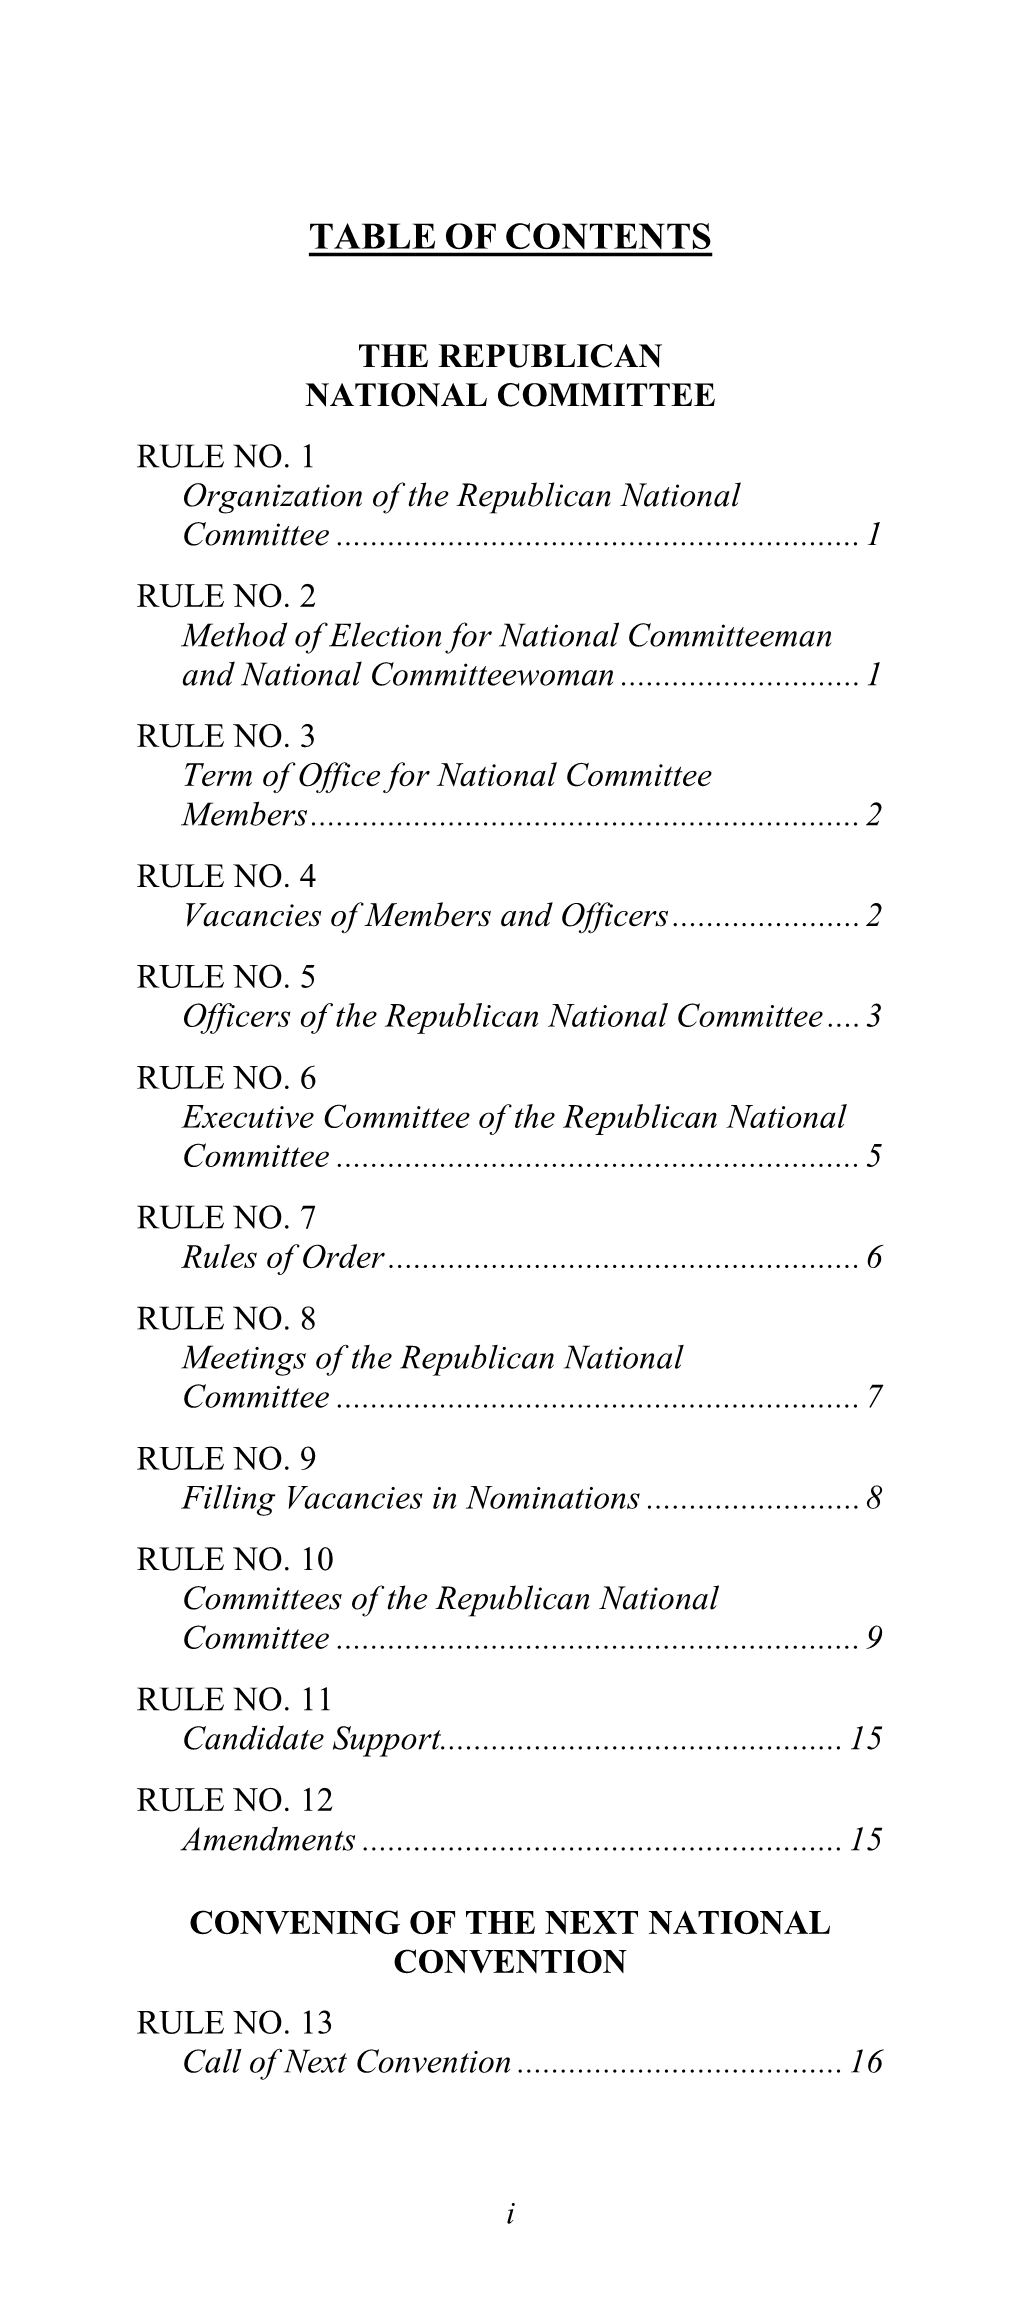 The Rules of the Republican Party